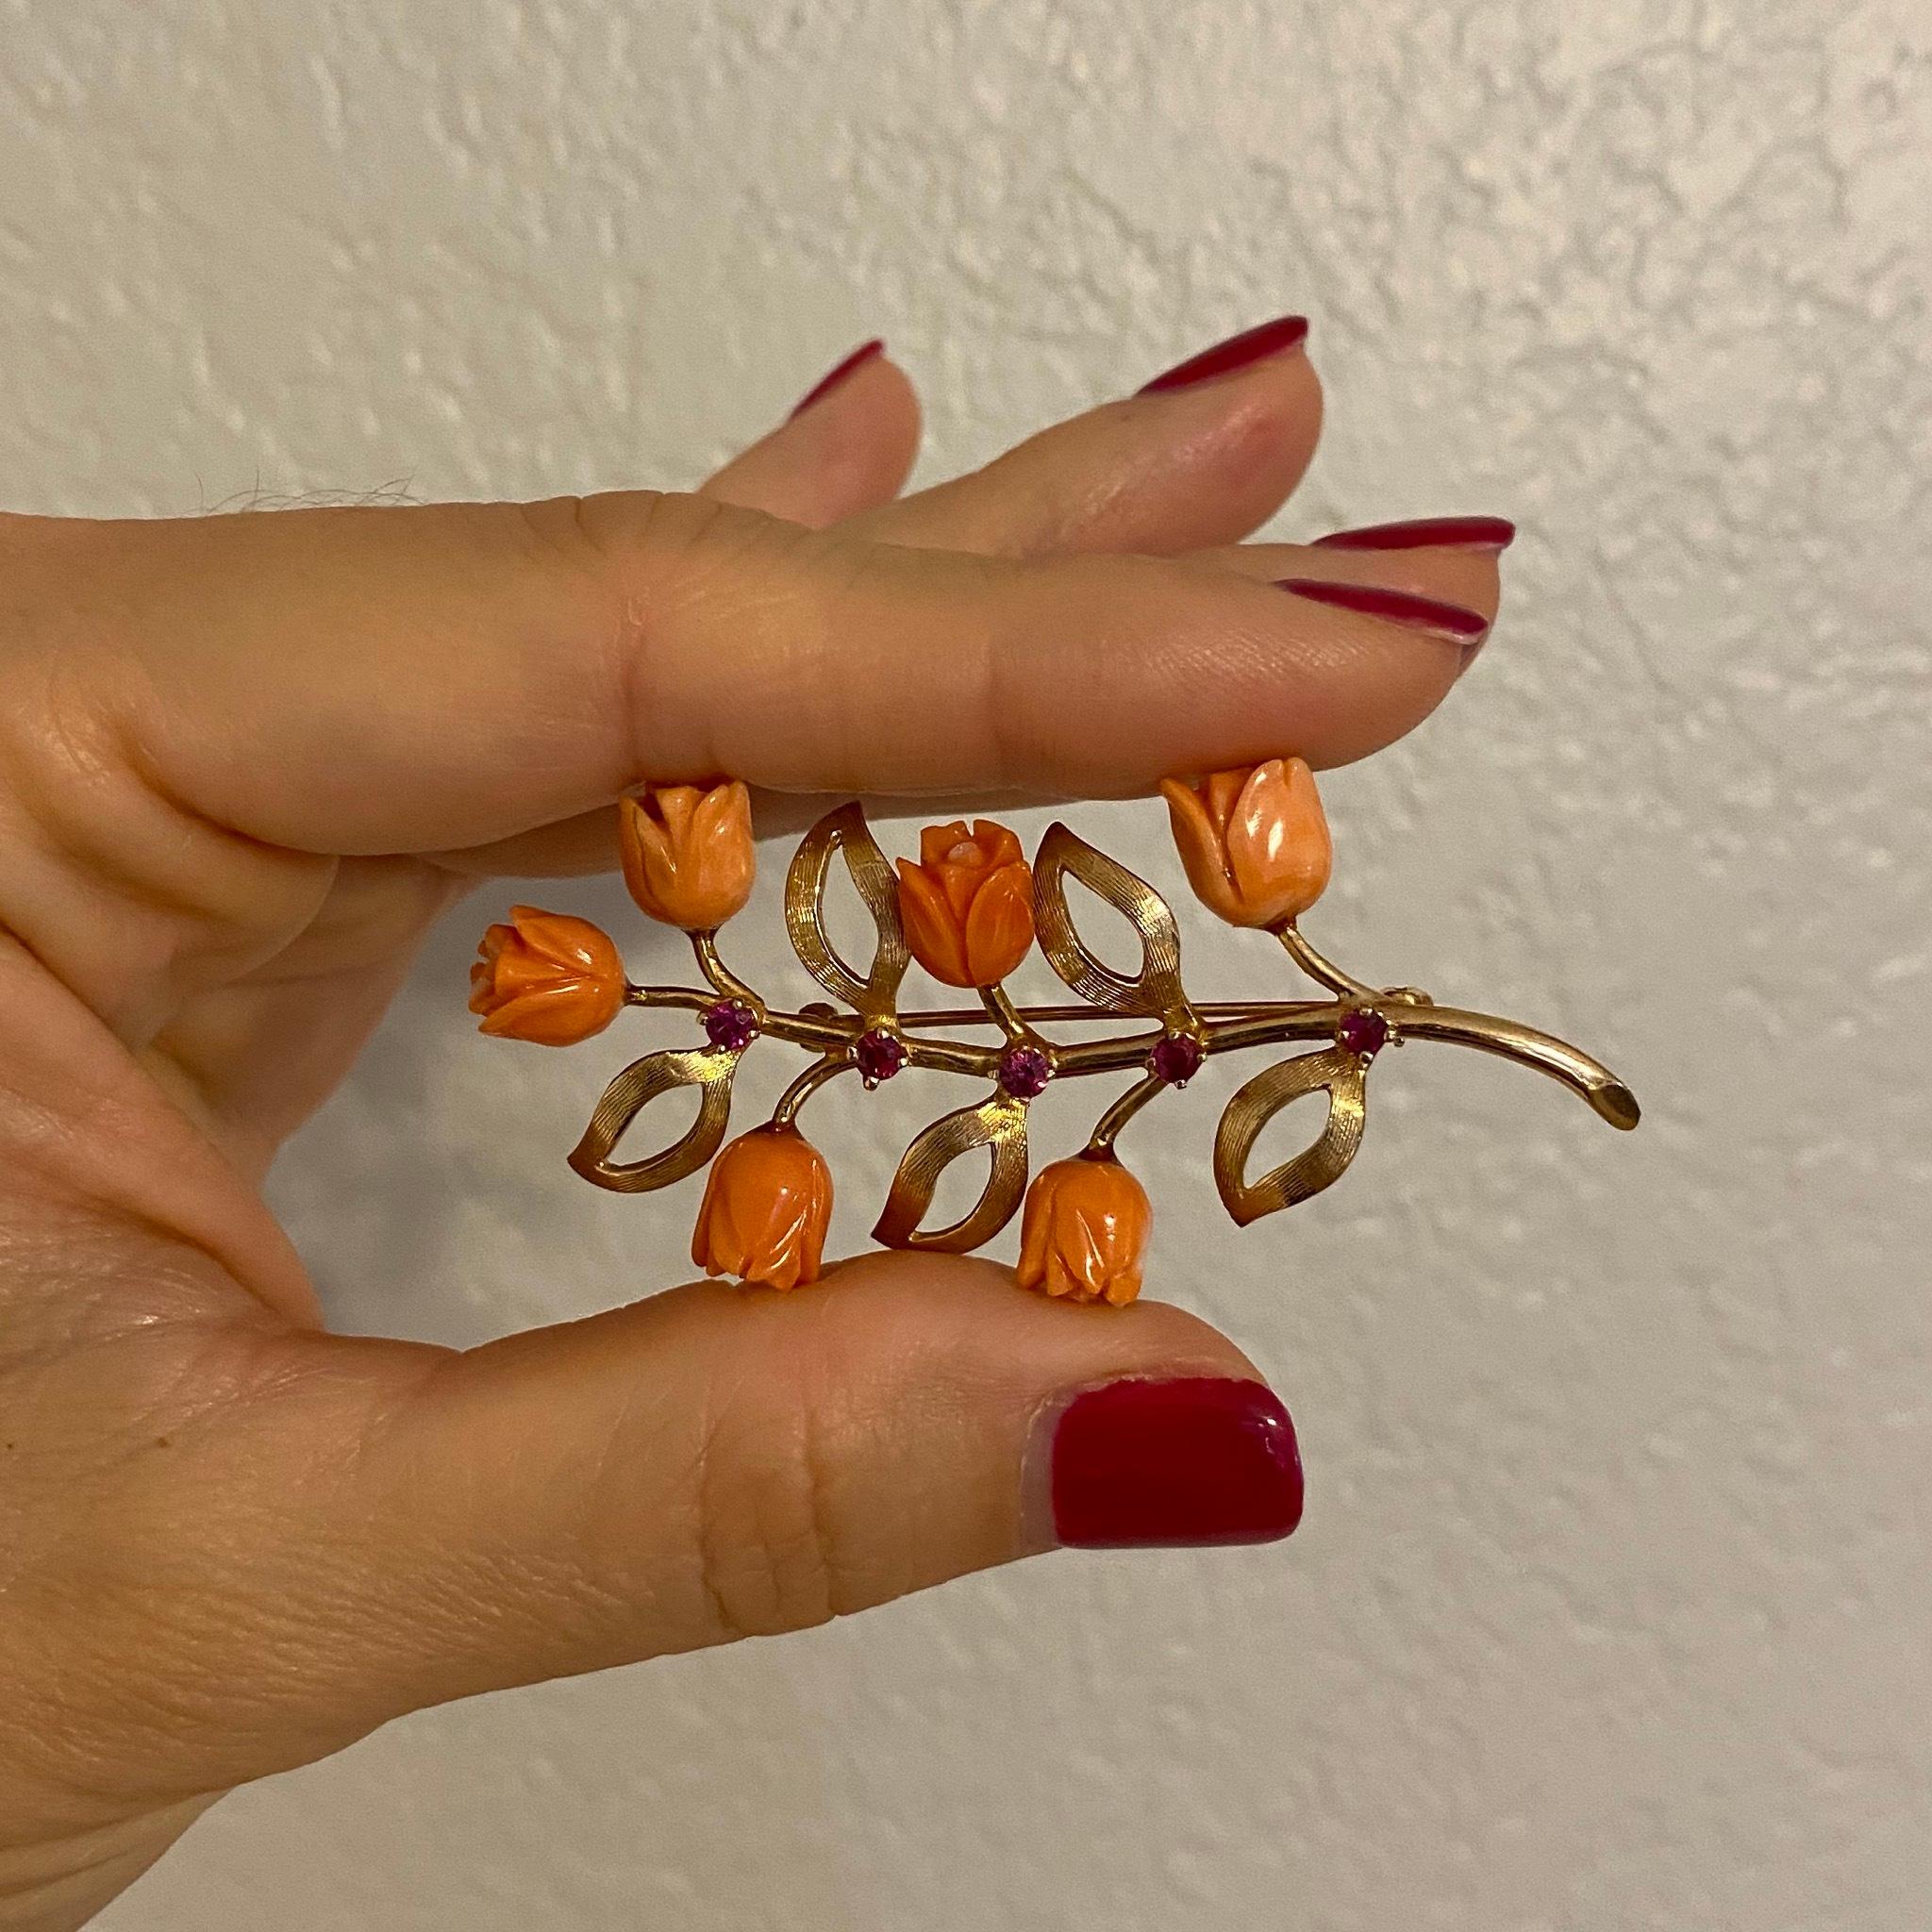 Beautiful Natural Coral and Rubies Branch and Floral brooch, set with 6 natural Coral Roses, weighing 6 total Carat weight and 5 round Rubies weighing 0.33 total carat weight. Hand crafted in 14 Karat rose Gold; Pin measures approx. 2.5” Long. Chic